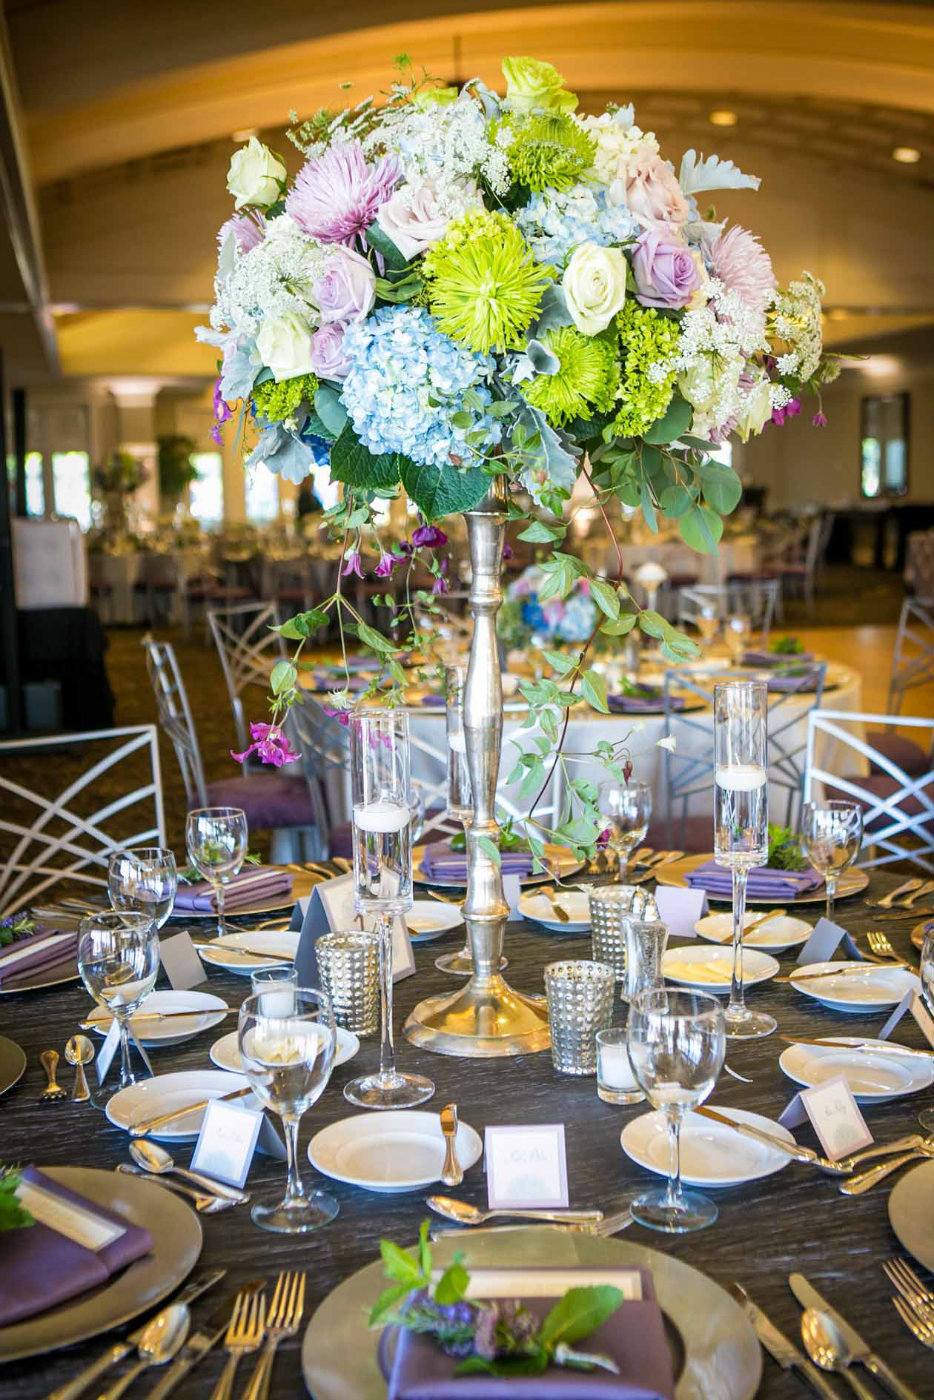 large centerpiece of blue hydrangea, purple roses, green chrysanthemums, , and trailing purple clematis, with floating glass candle holders